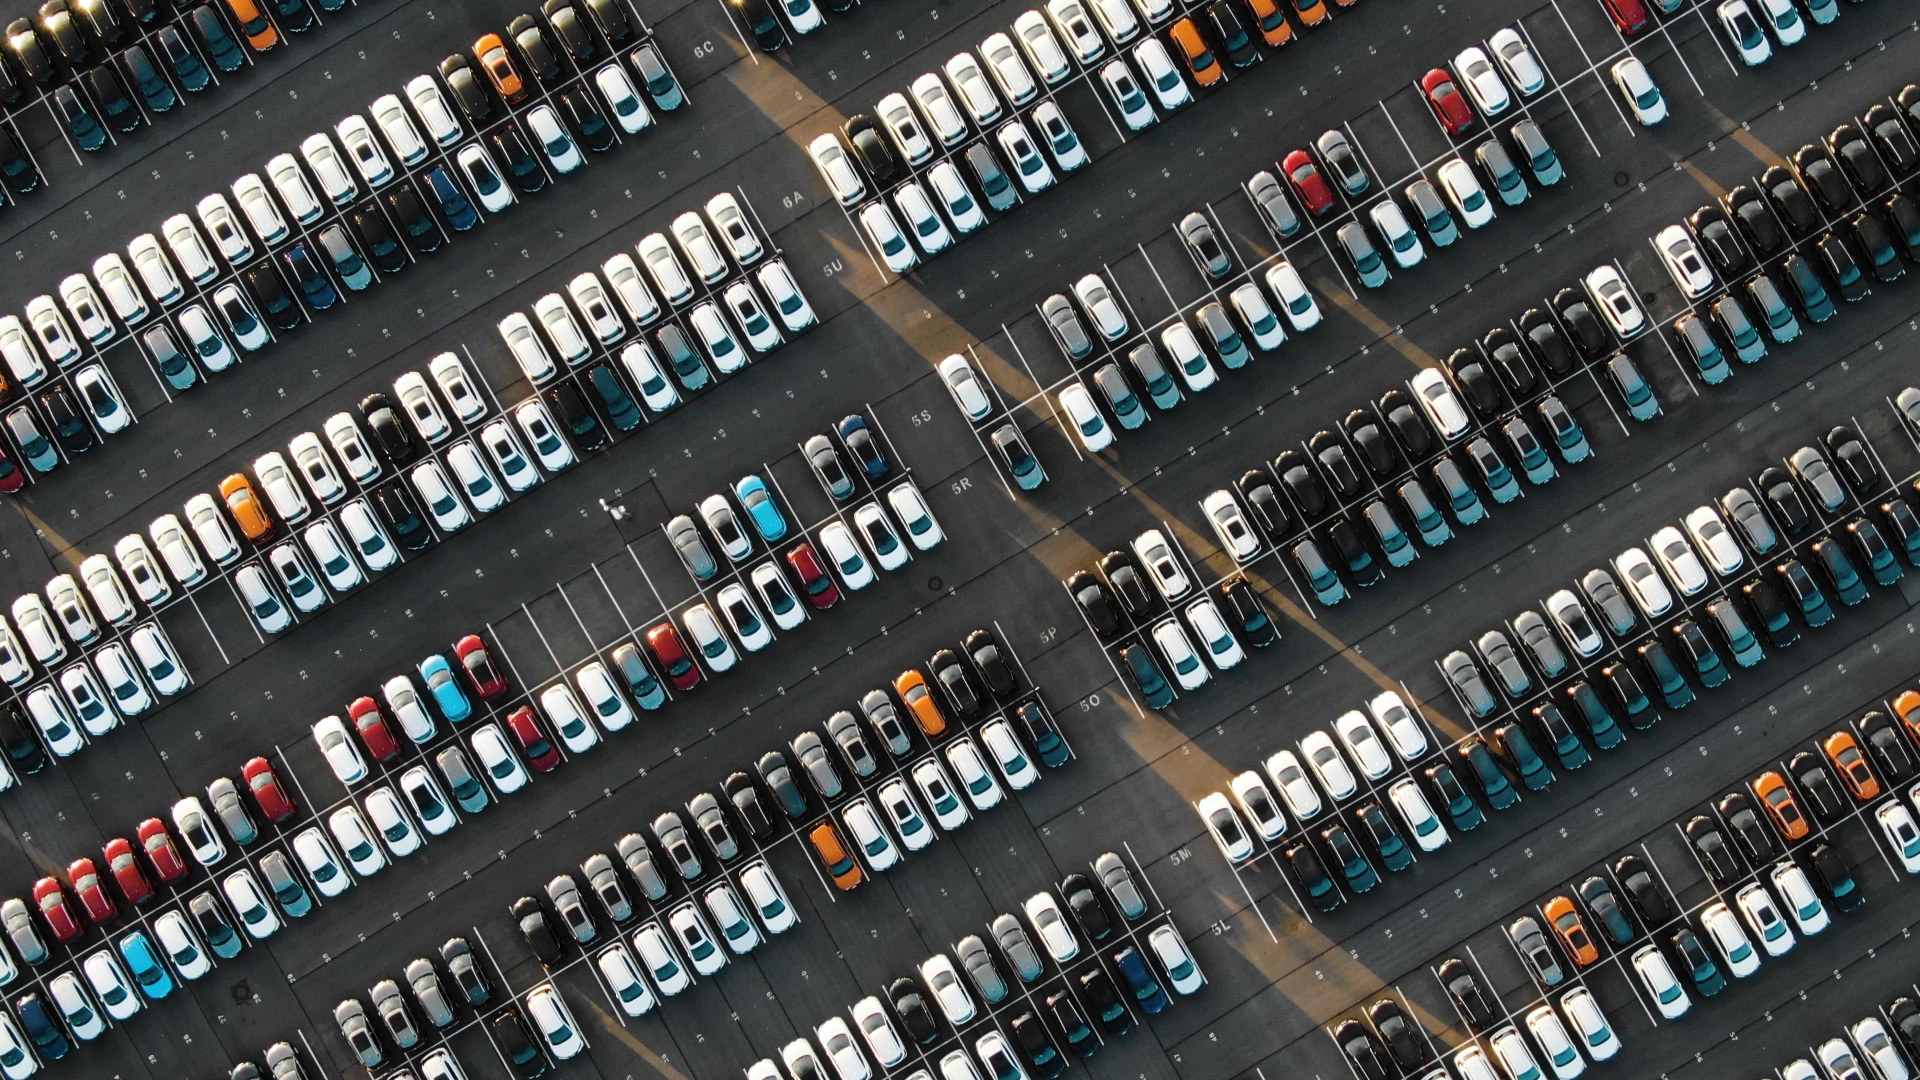 How the Covid-19 Pandemic Has Affected Parking Behavior